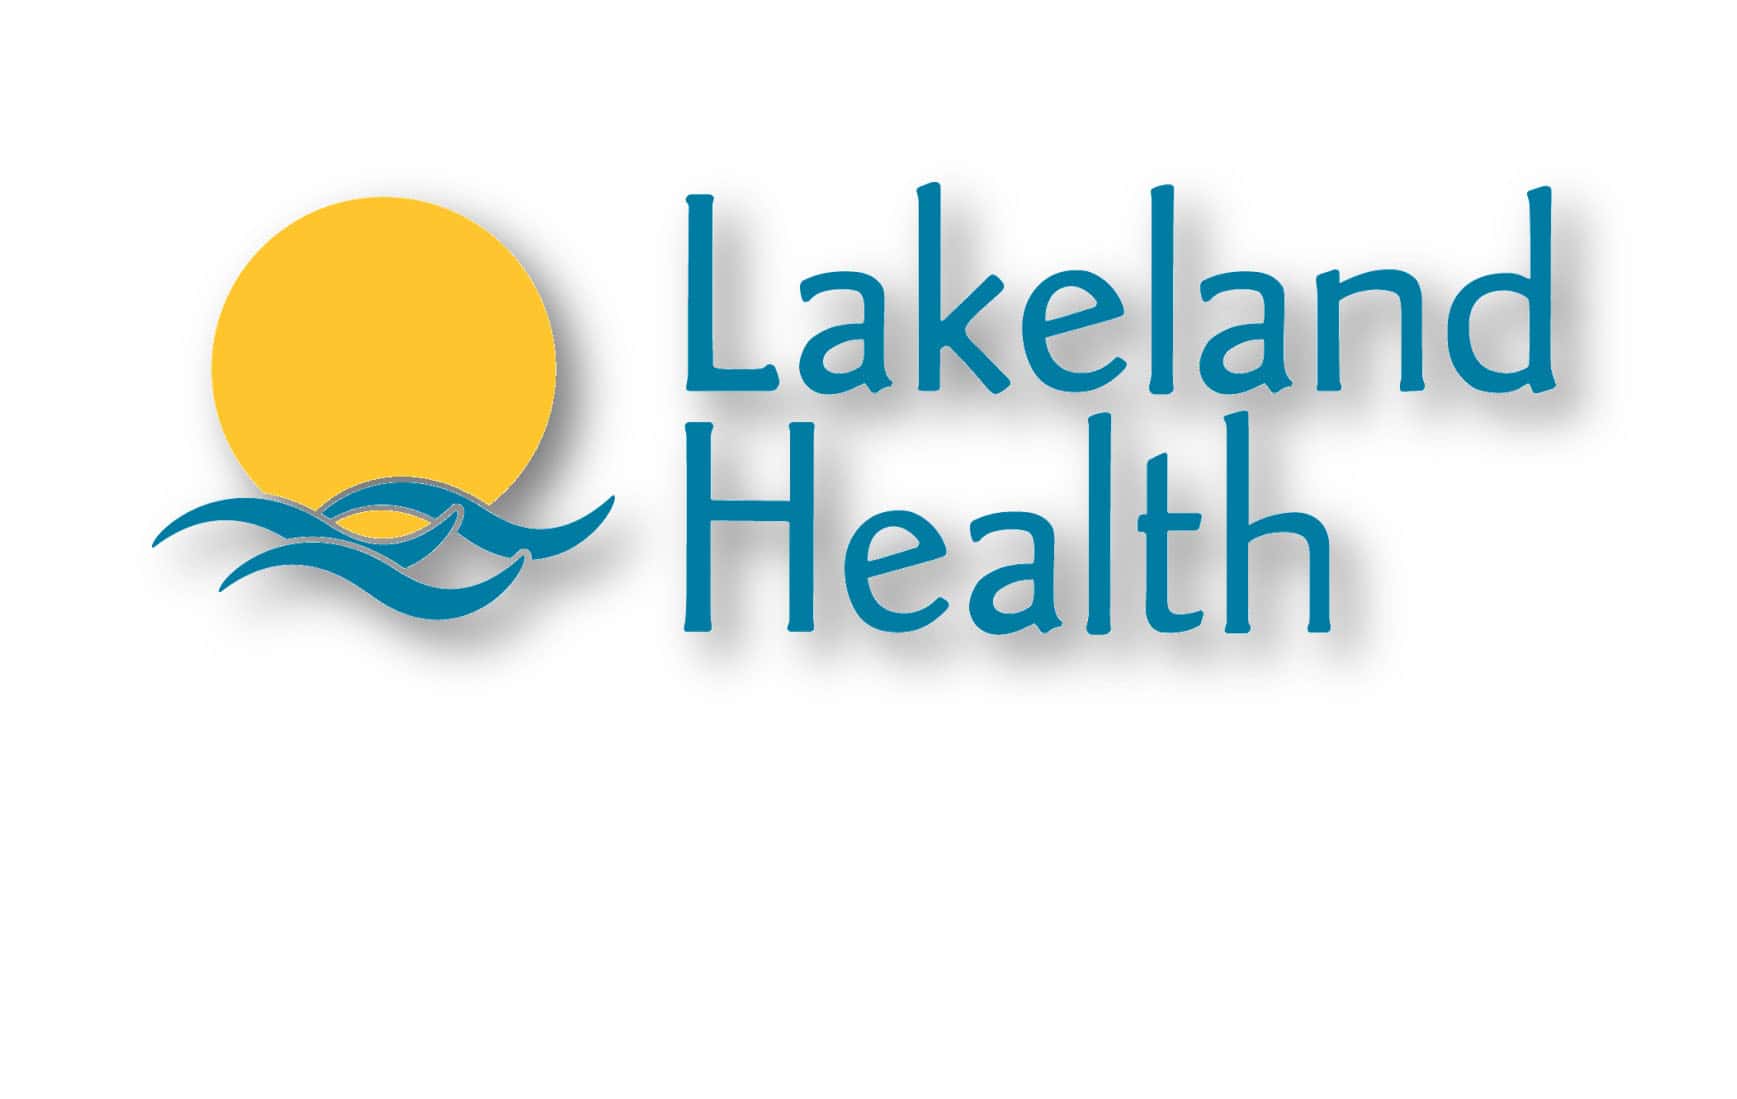 Lakeland Leads Electronic Med Chart Revolution Moody on the Market